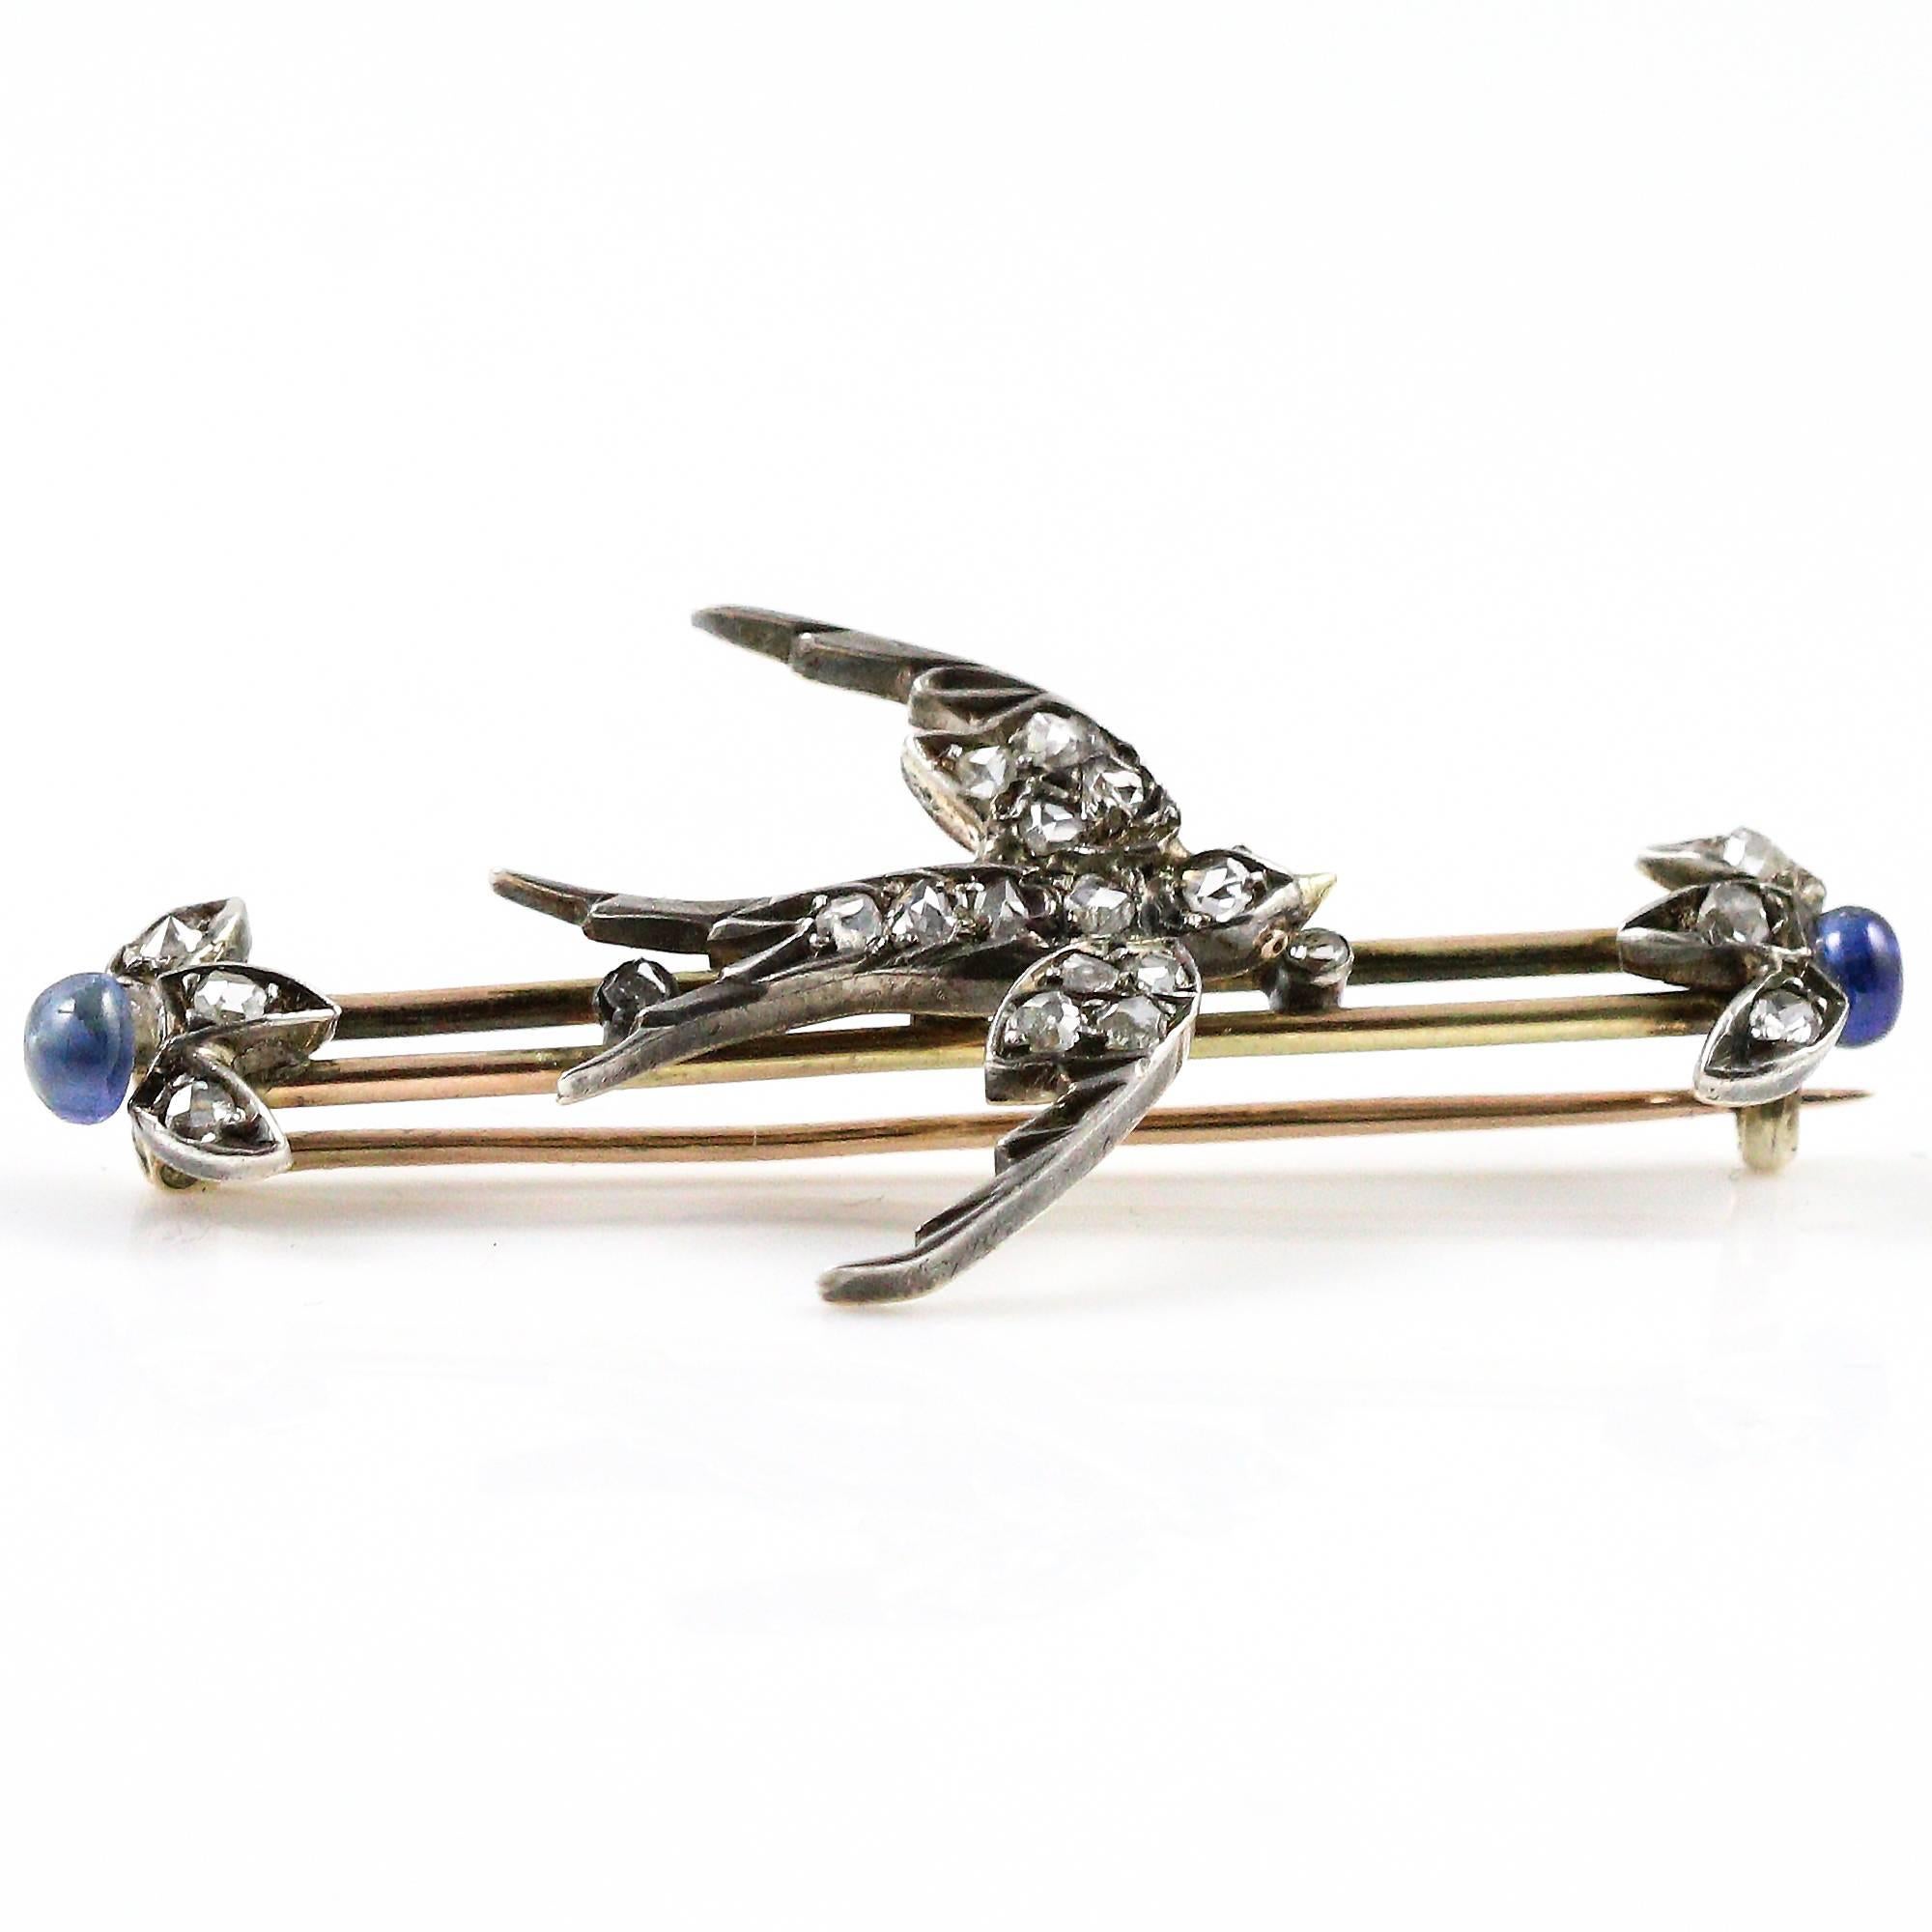 This Victorian swallow brooch includes 2 round blue sapphires and 20 diamonds (19 are old rose cuts, 1 of the diamonds on the sides is an upside down round brilliant cut that was used to replace one of the original stones at some point in the pieces